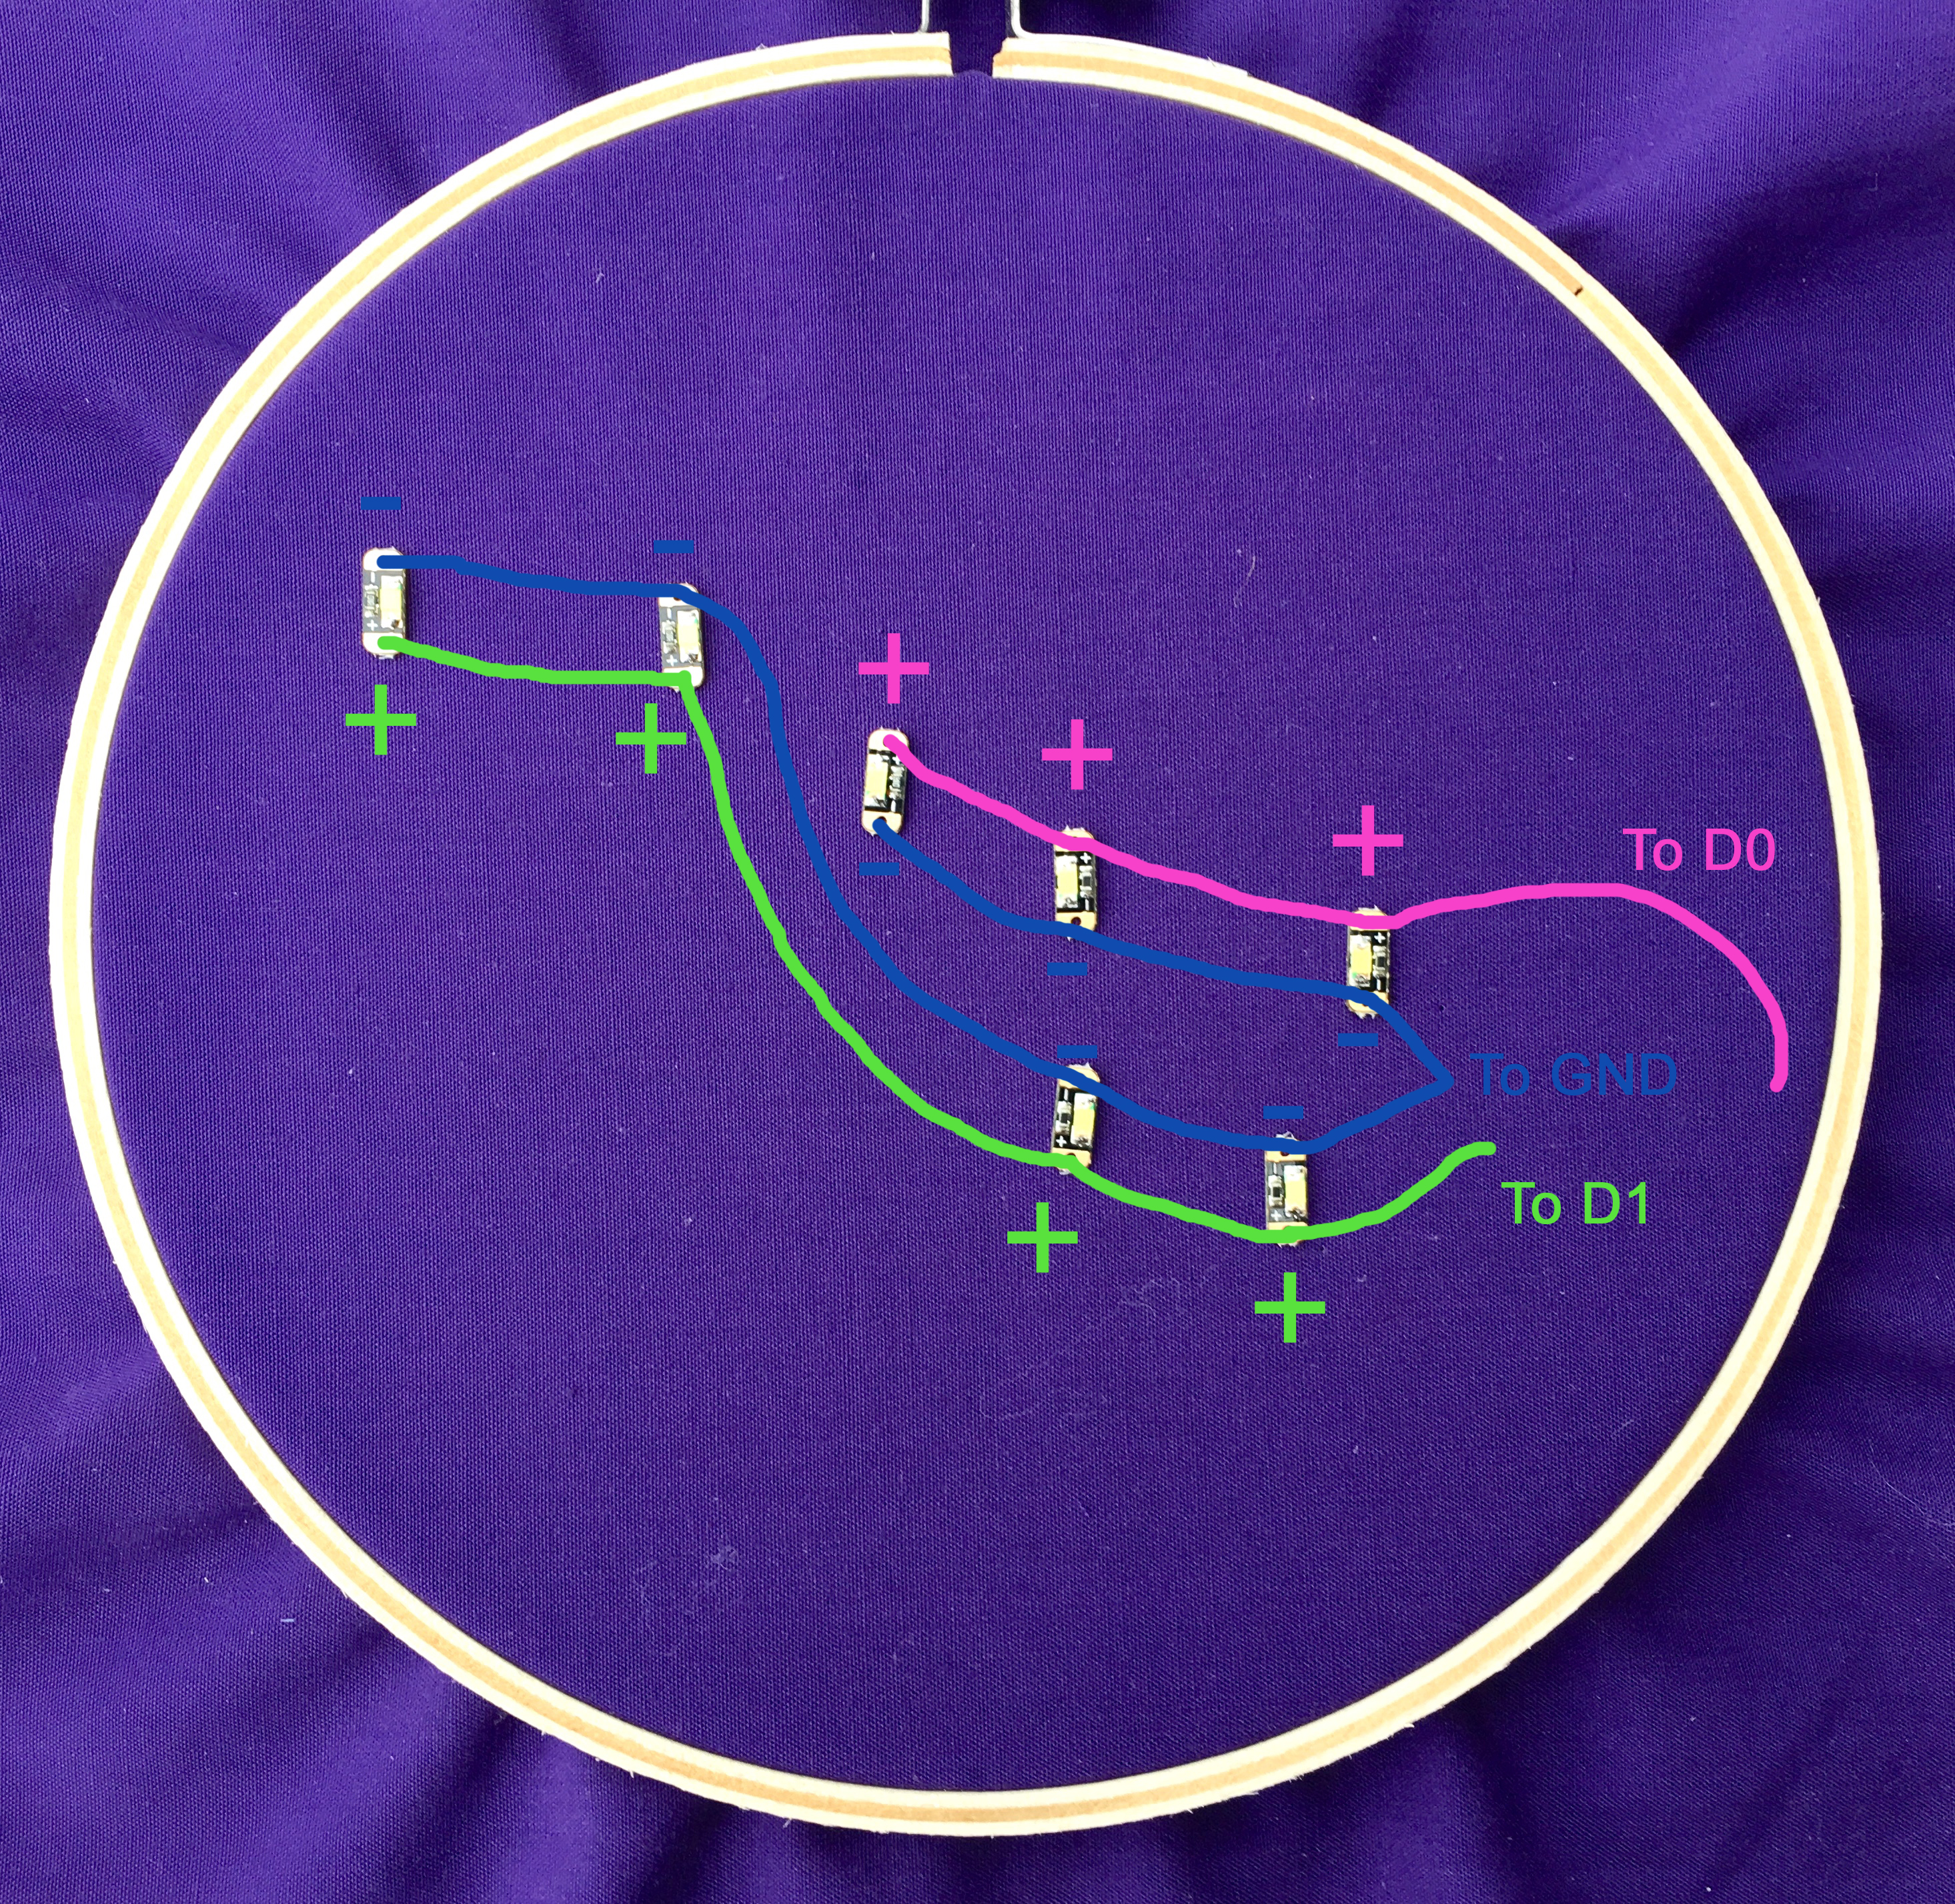 Embroidery roadmap